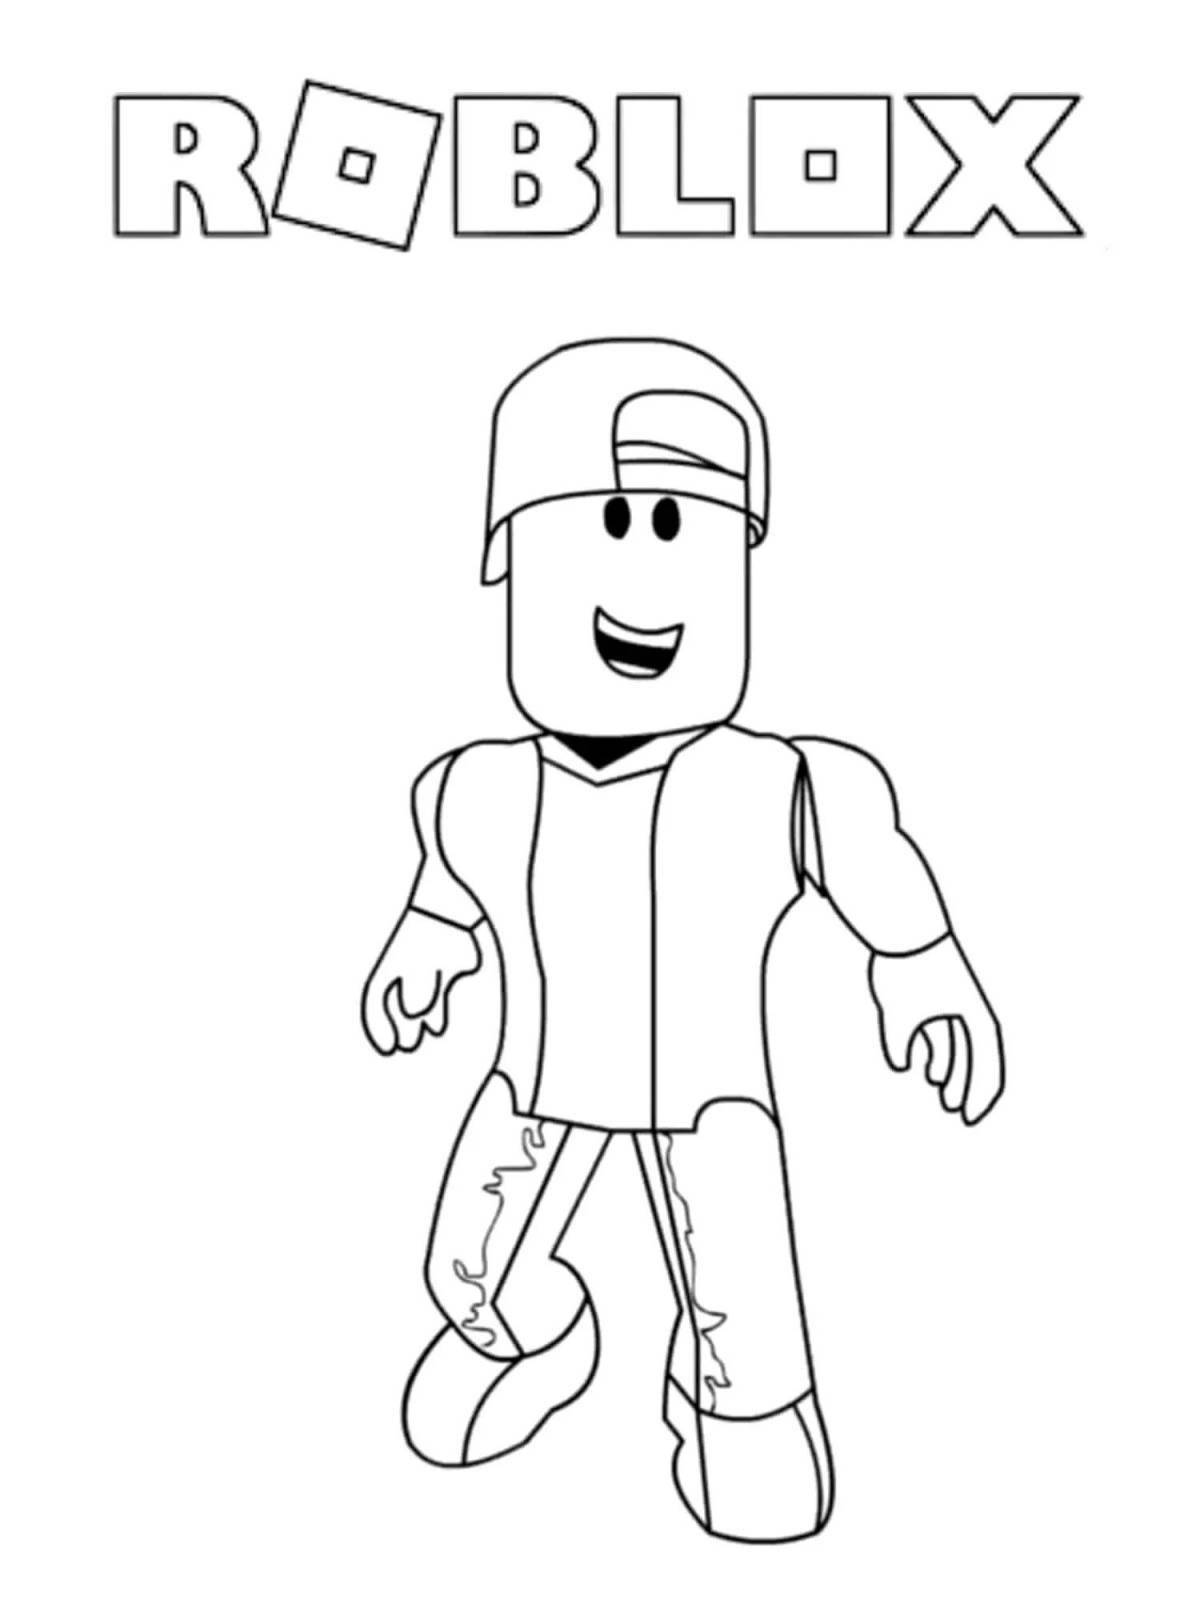 Roblox fun face coloring page